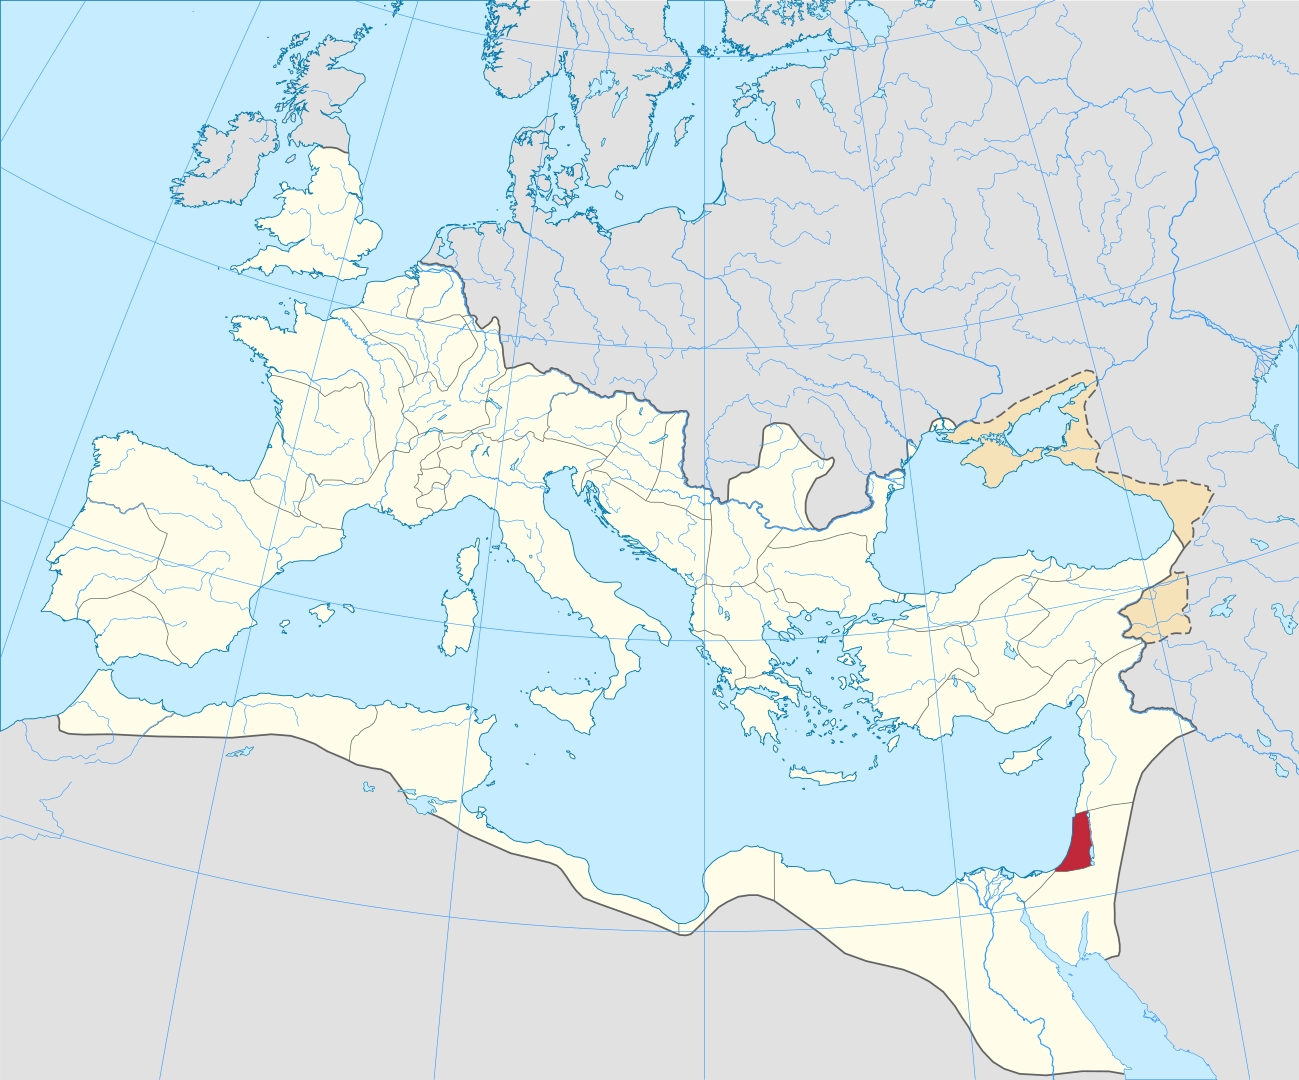 The Roman Empire under the reign of Hadrian (125 CE) with Judaea highlighted in red